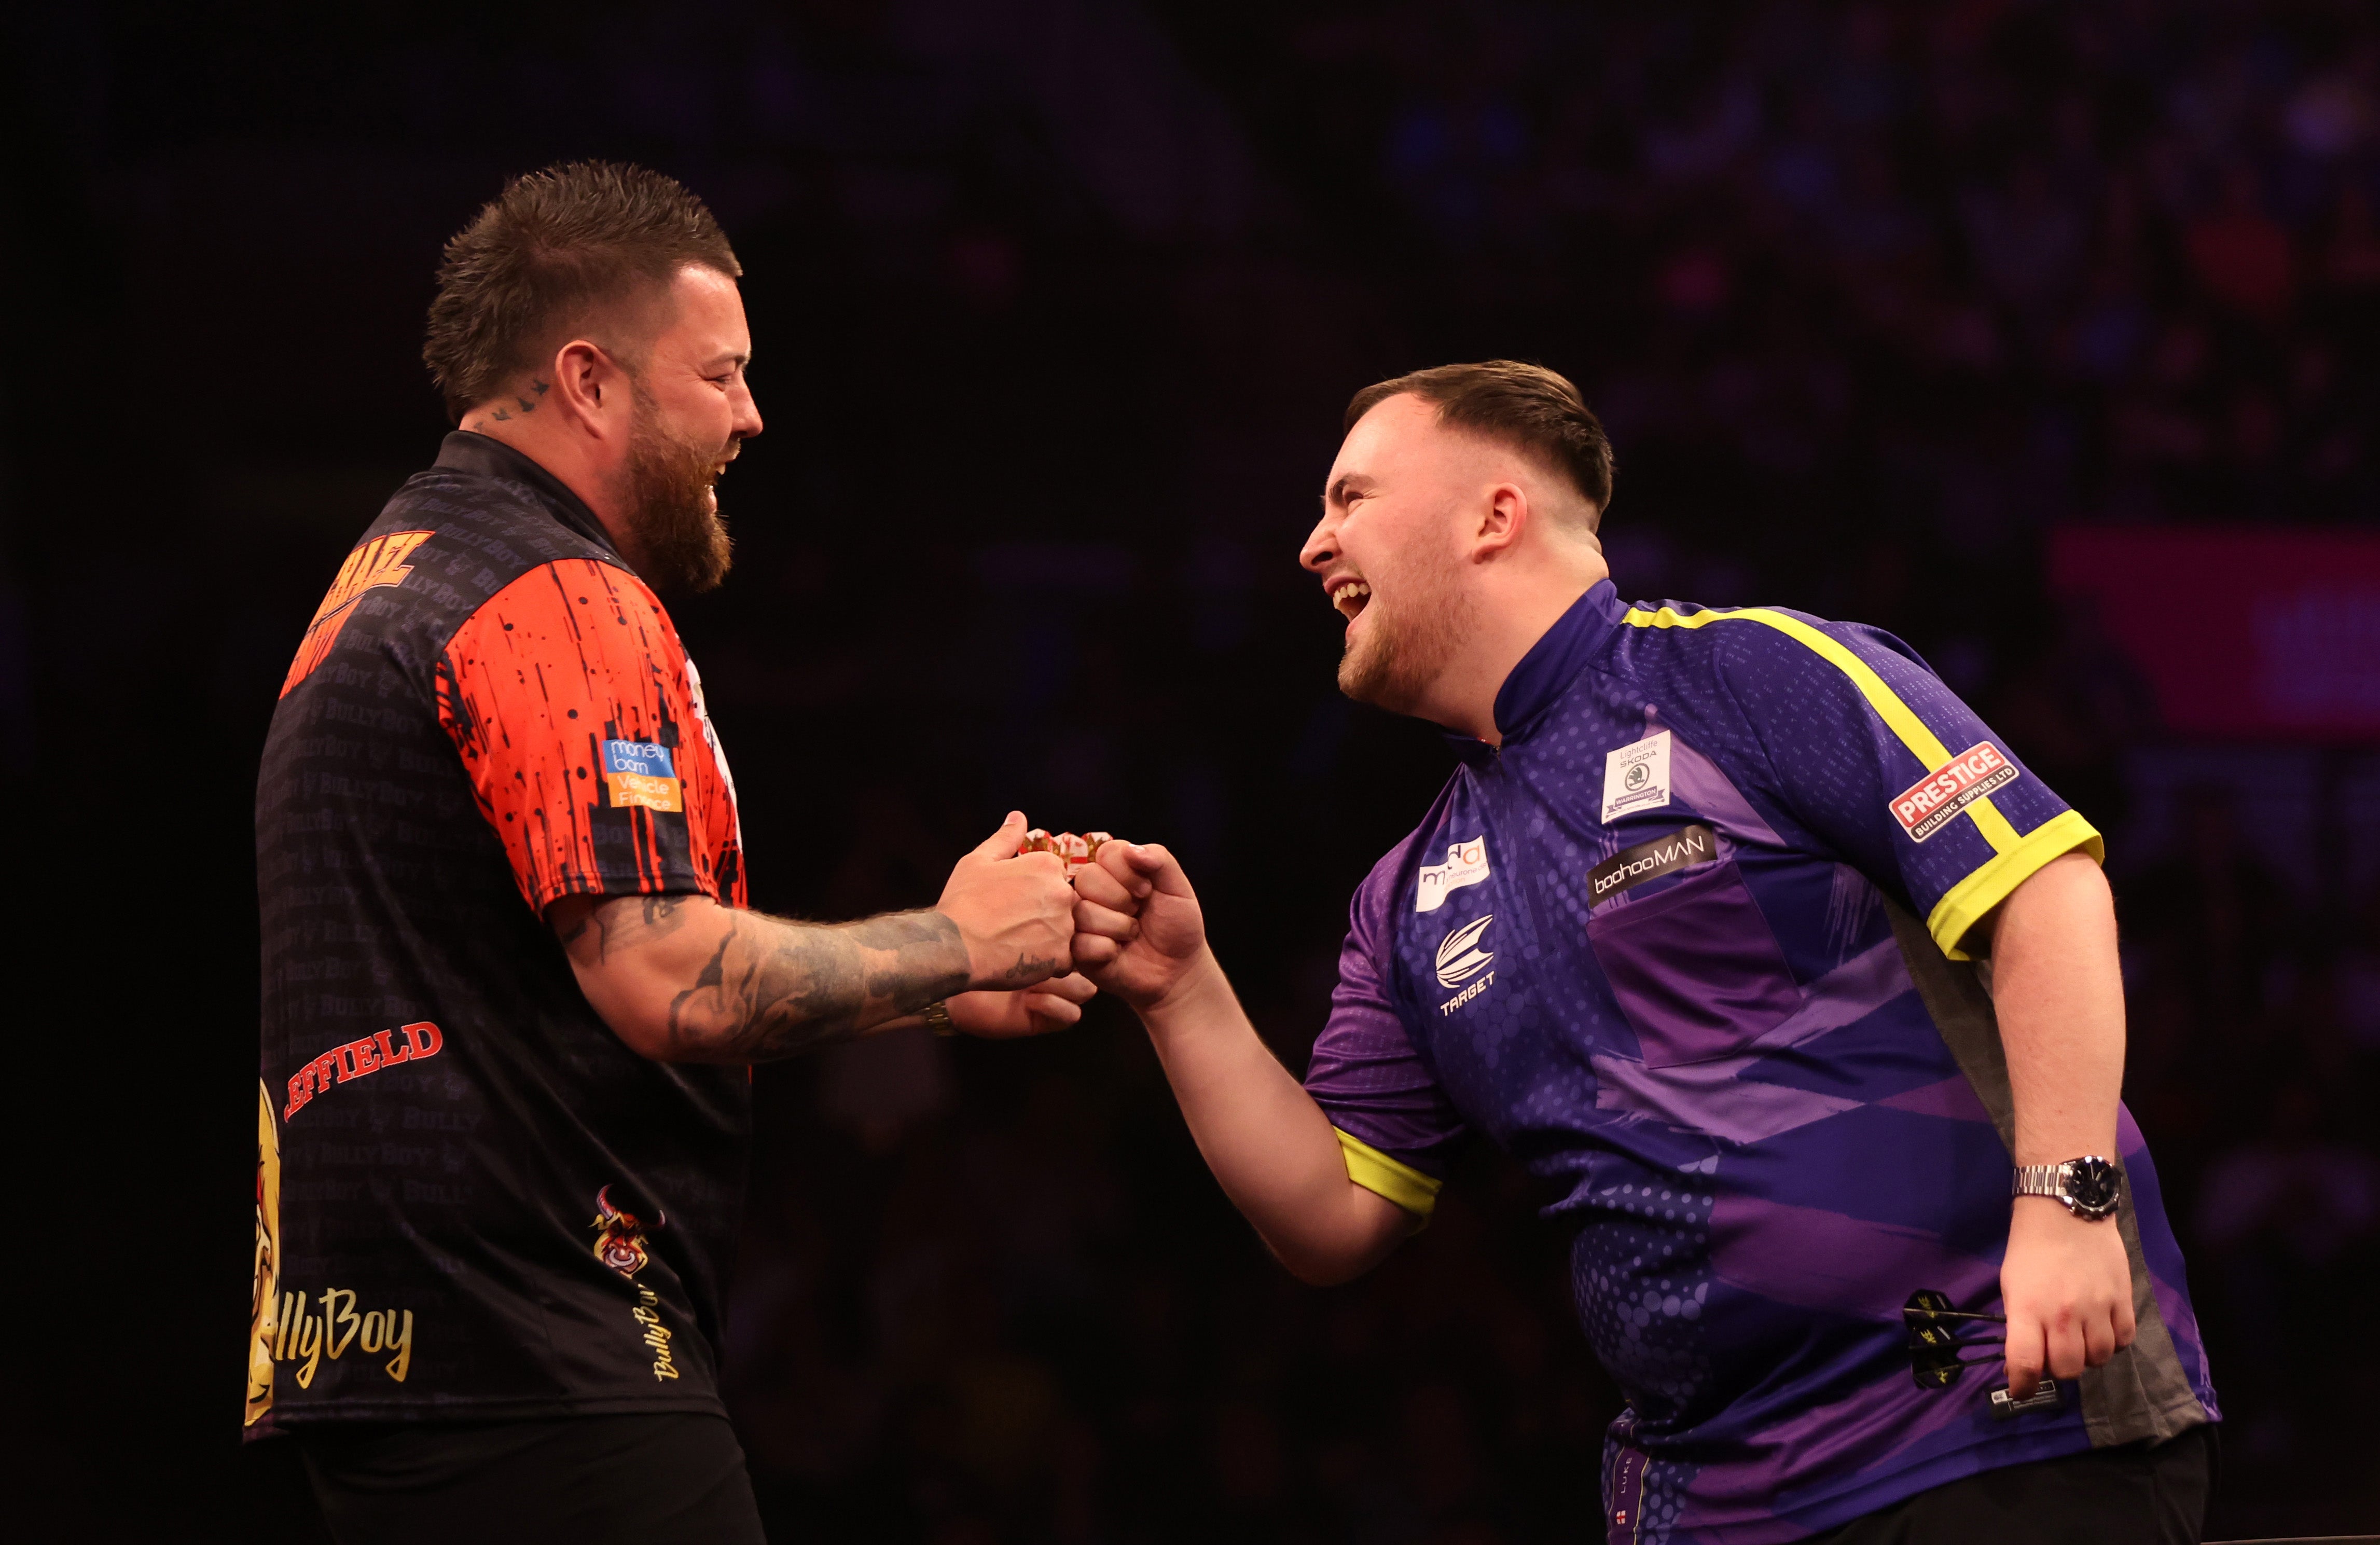 Like Littler and Michael Smith share a joke on night 16 in Sheffield